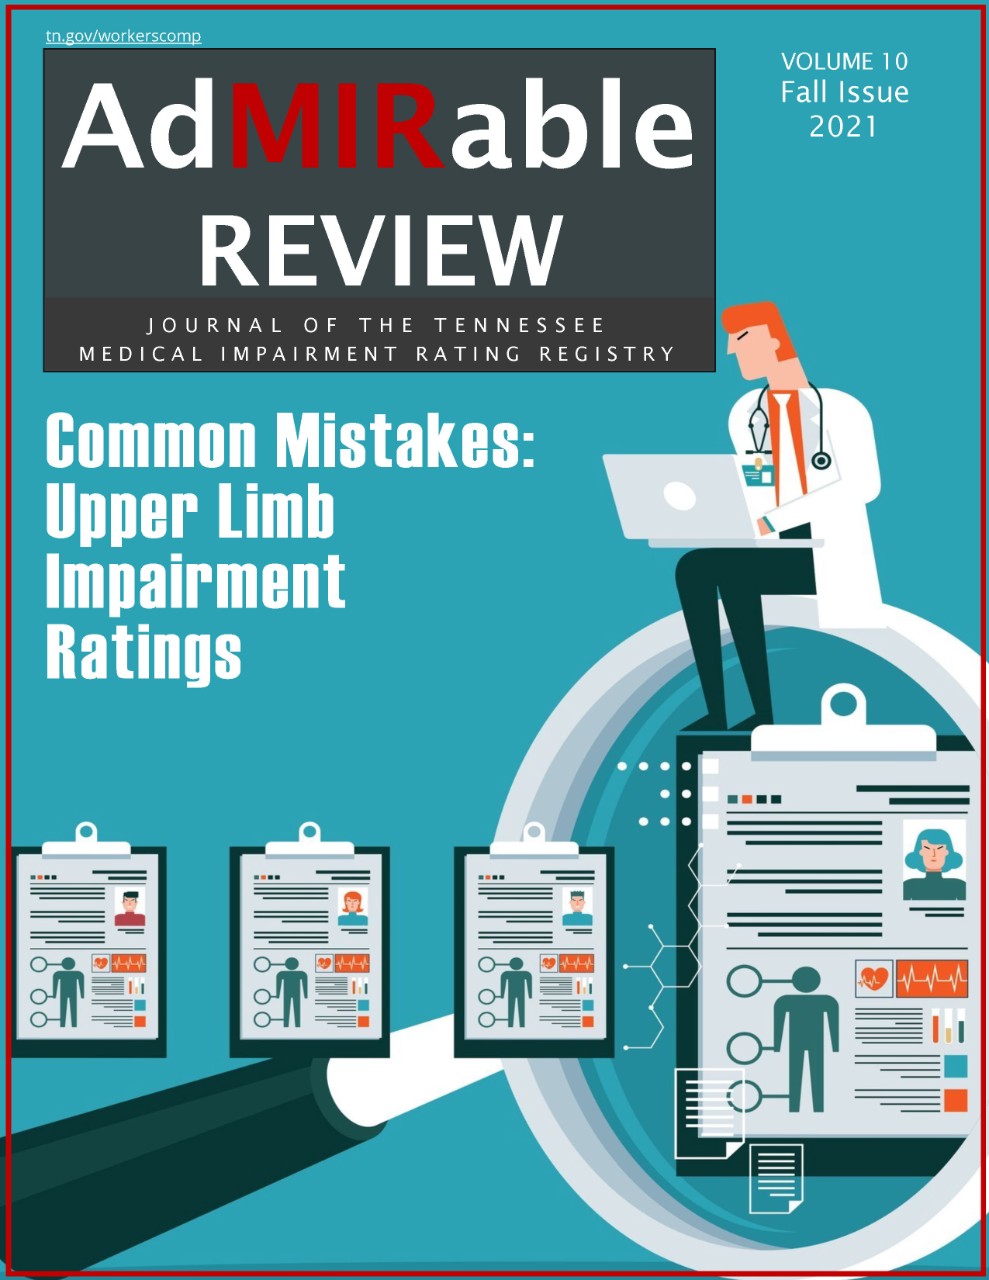 Cover art to the AdMIRable Review Journal